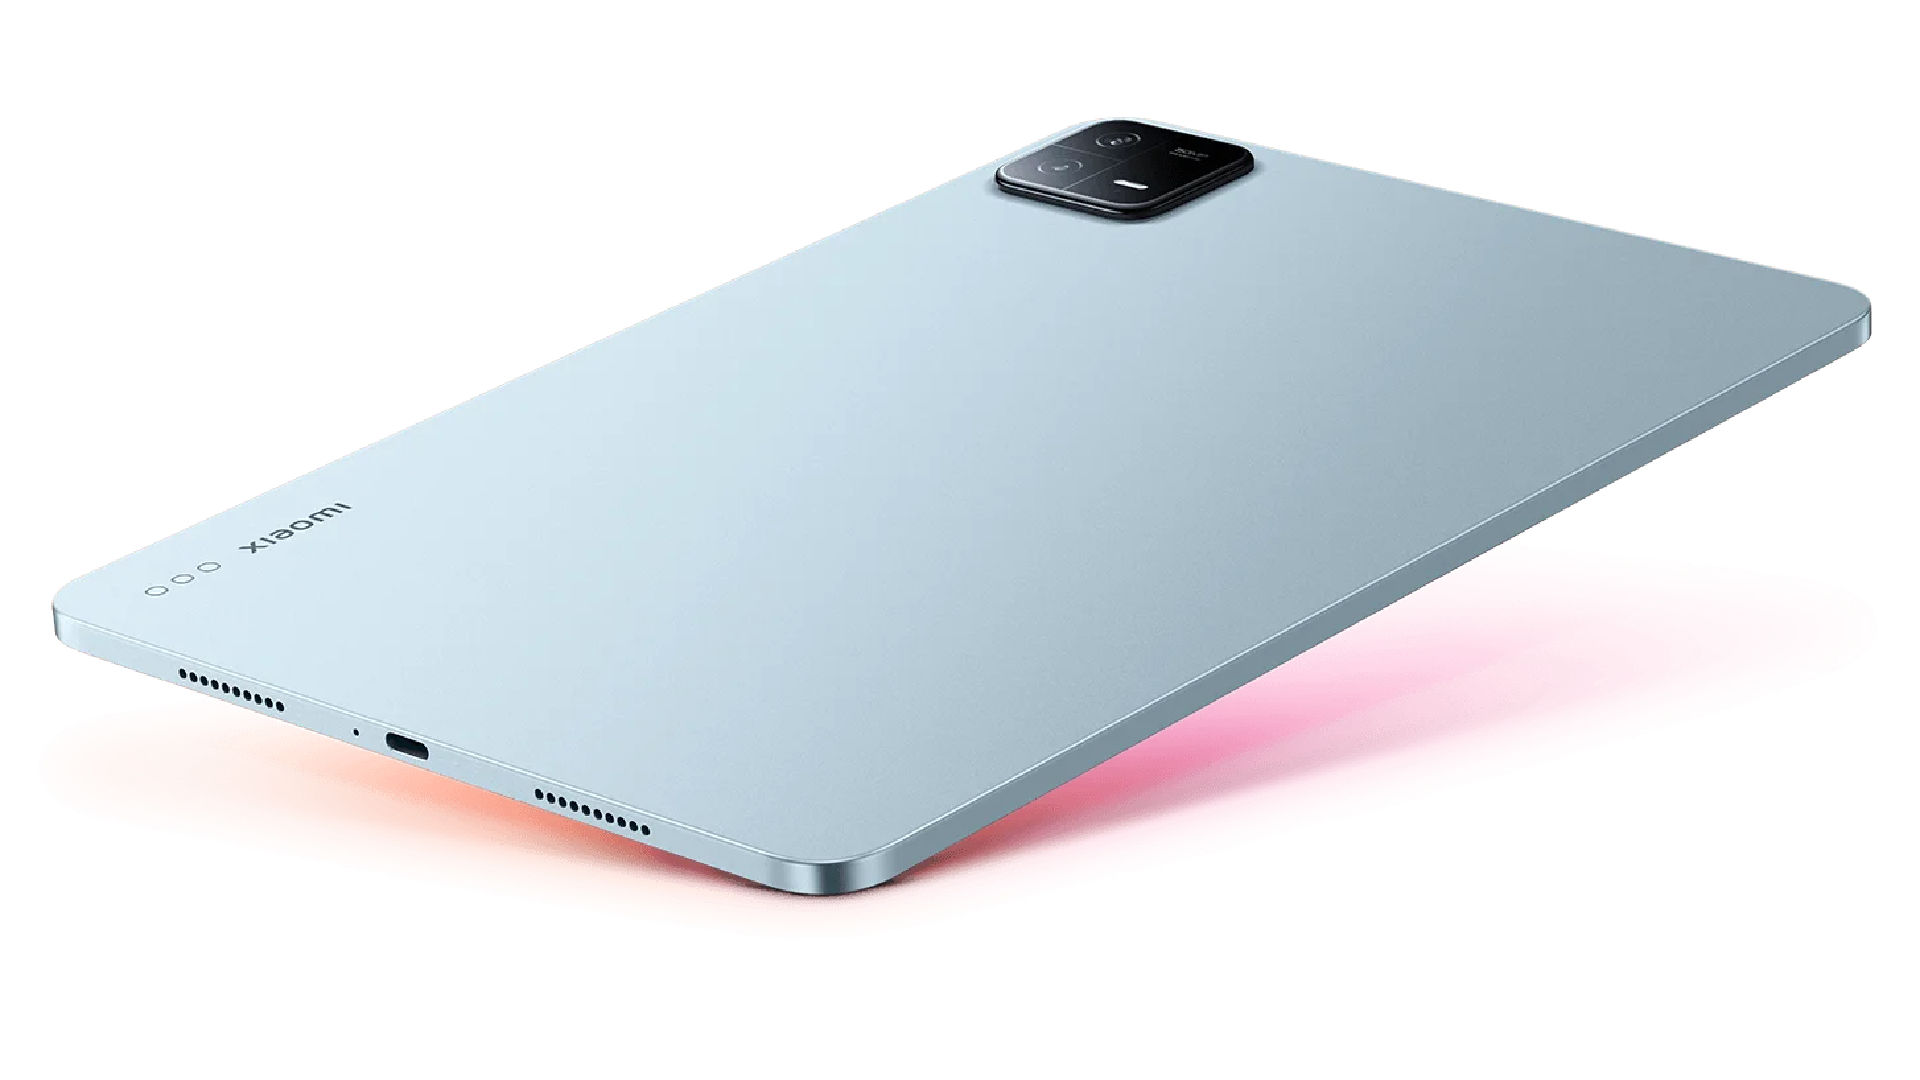 Xiaomi Pad 6 Price, Specifications, Features, Comparison